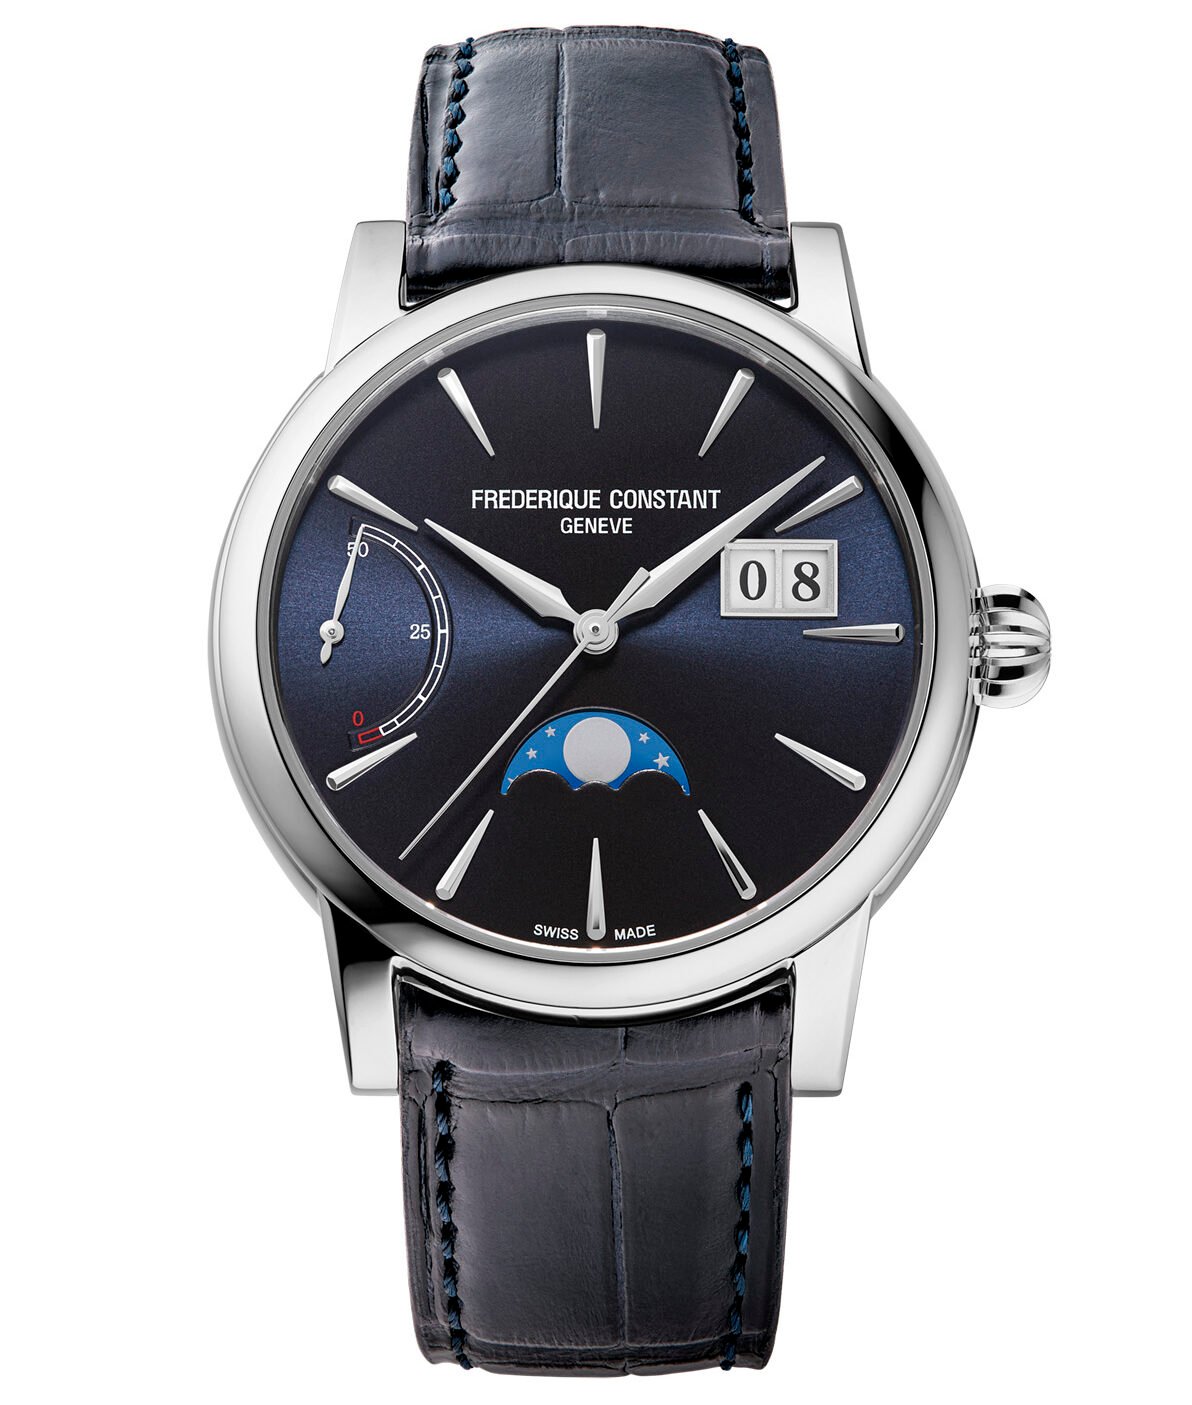 【F】 New: Frederique Constant Classic Power Reserve Big Date